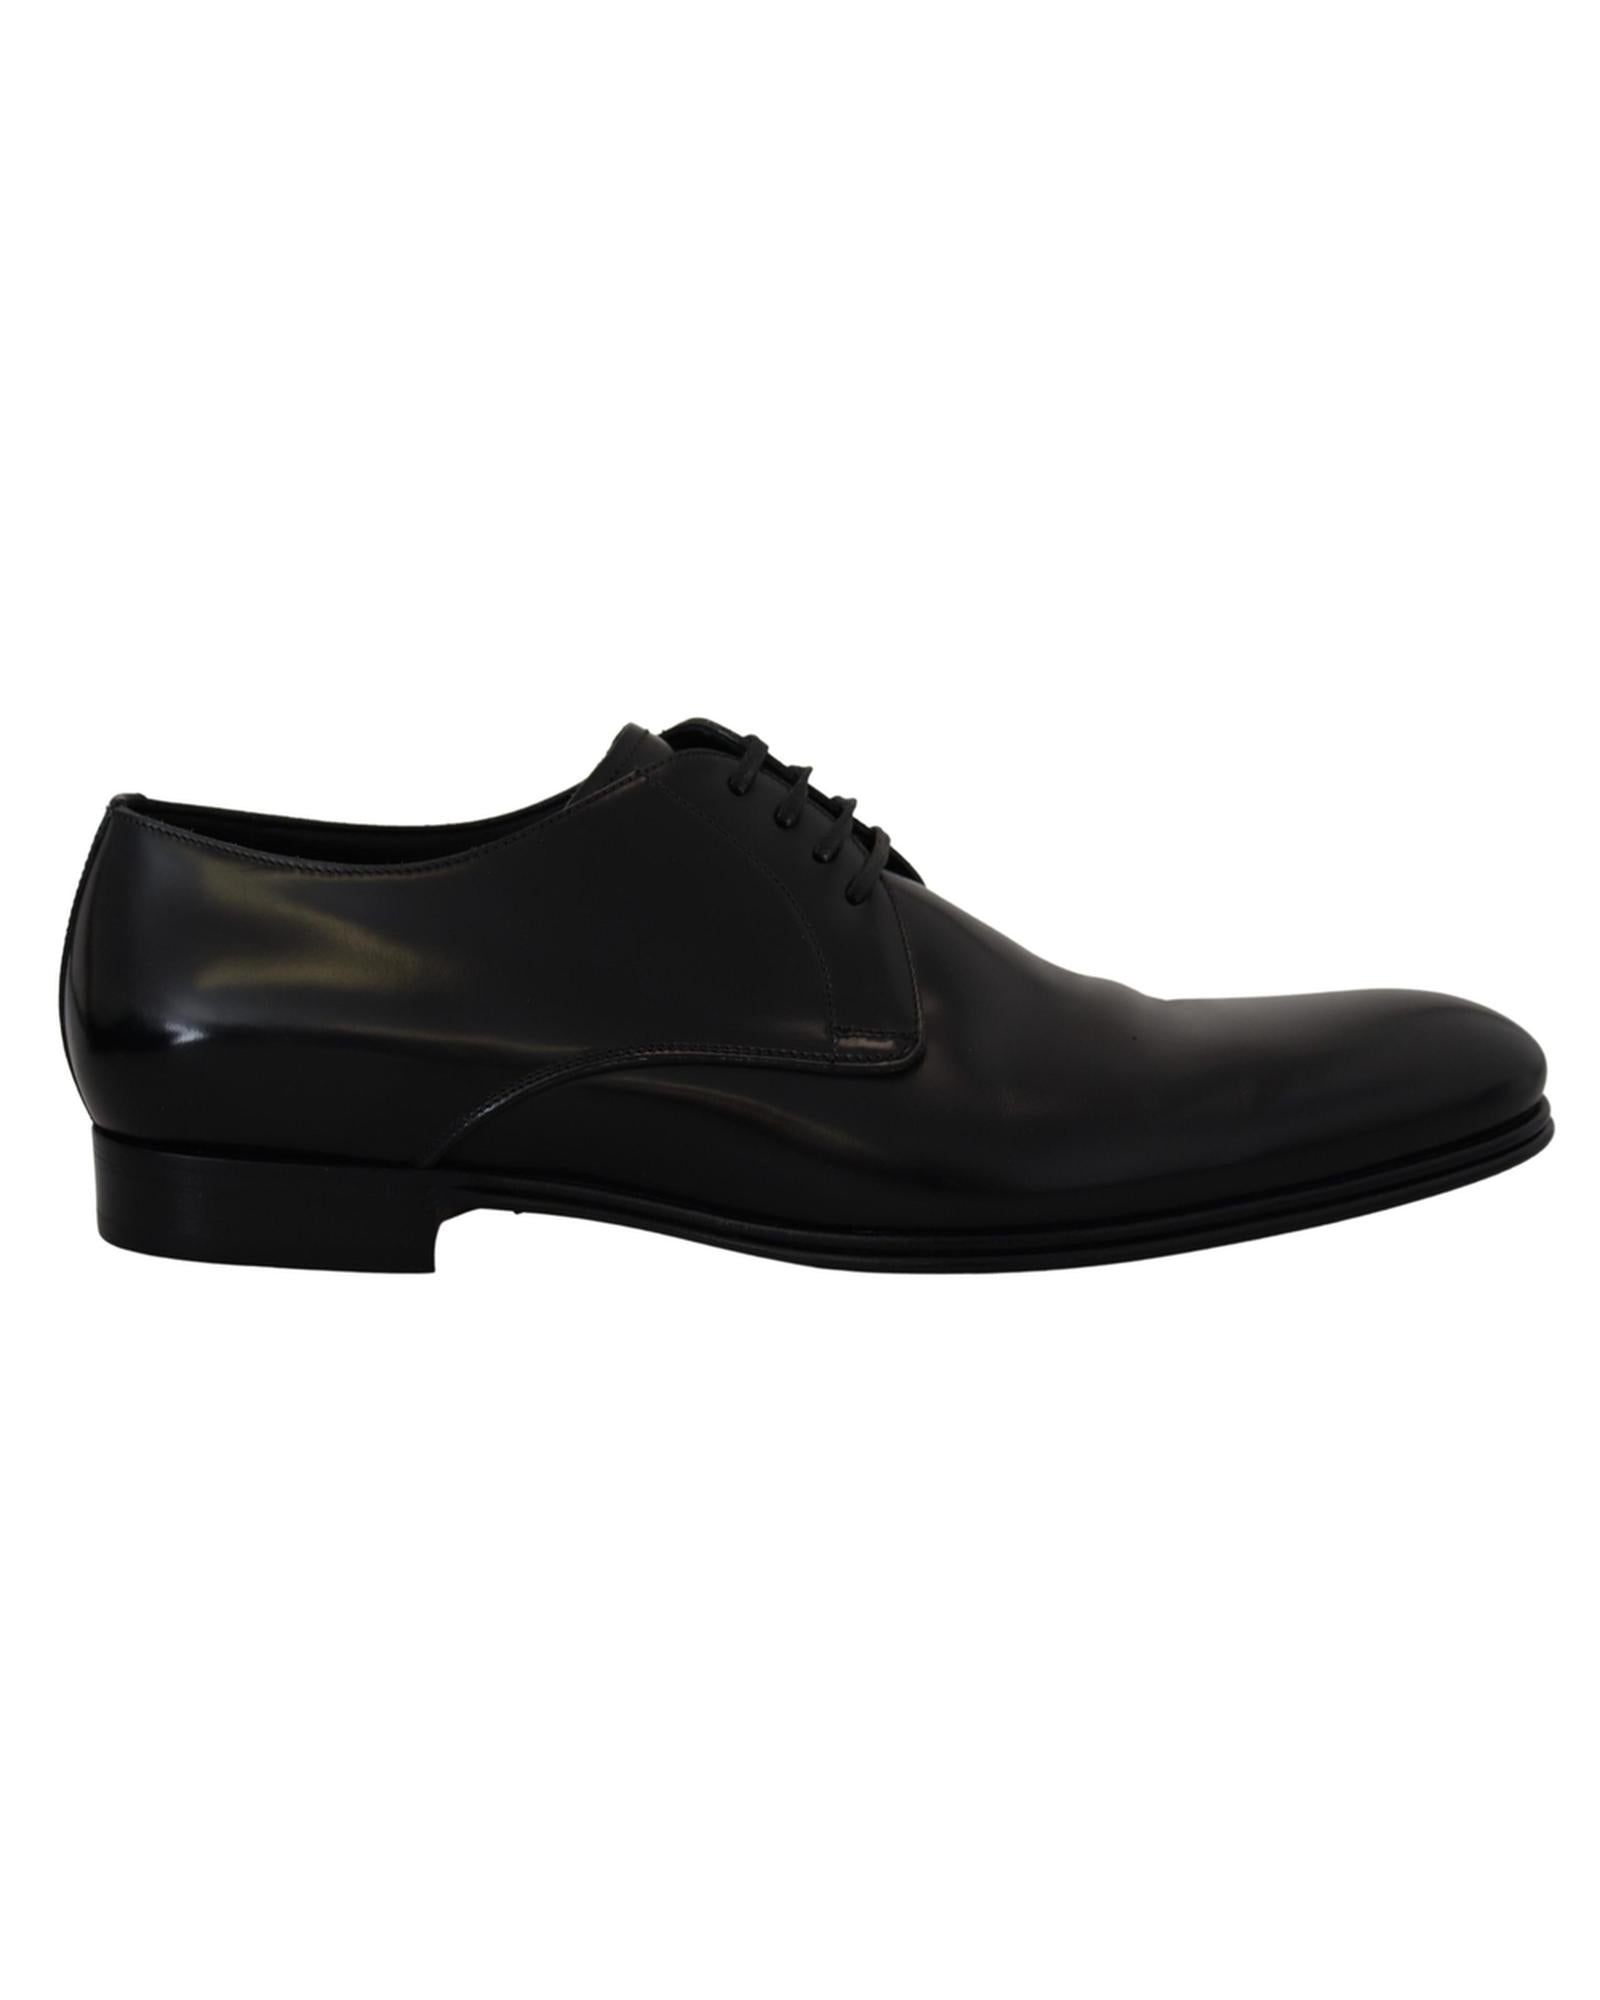 Derby Dress Formal Shoes with Leather Sole and Logo Details 46 EU Men